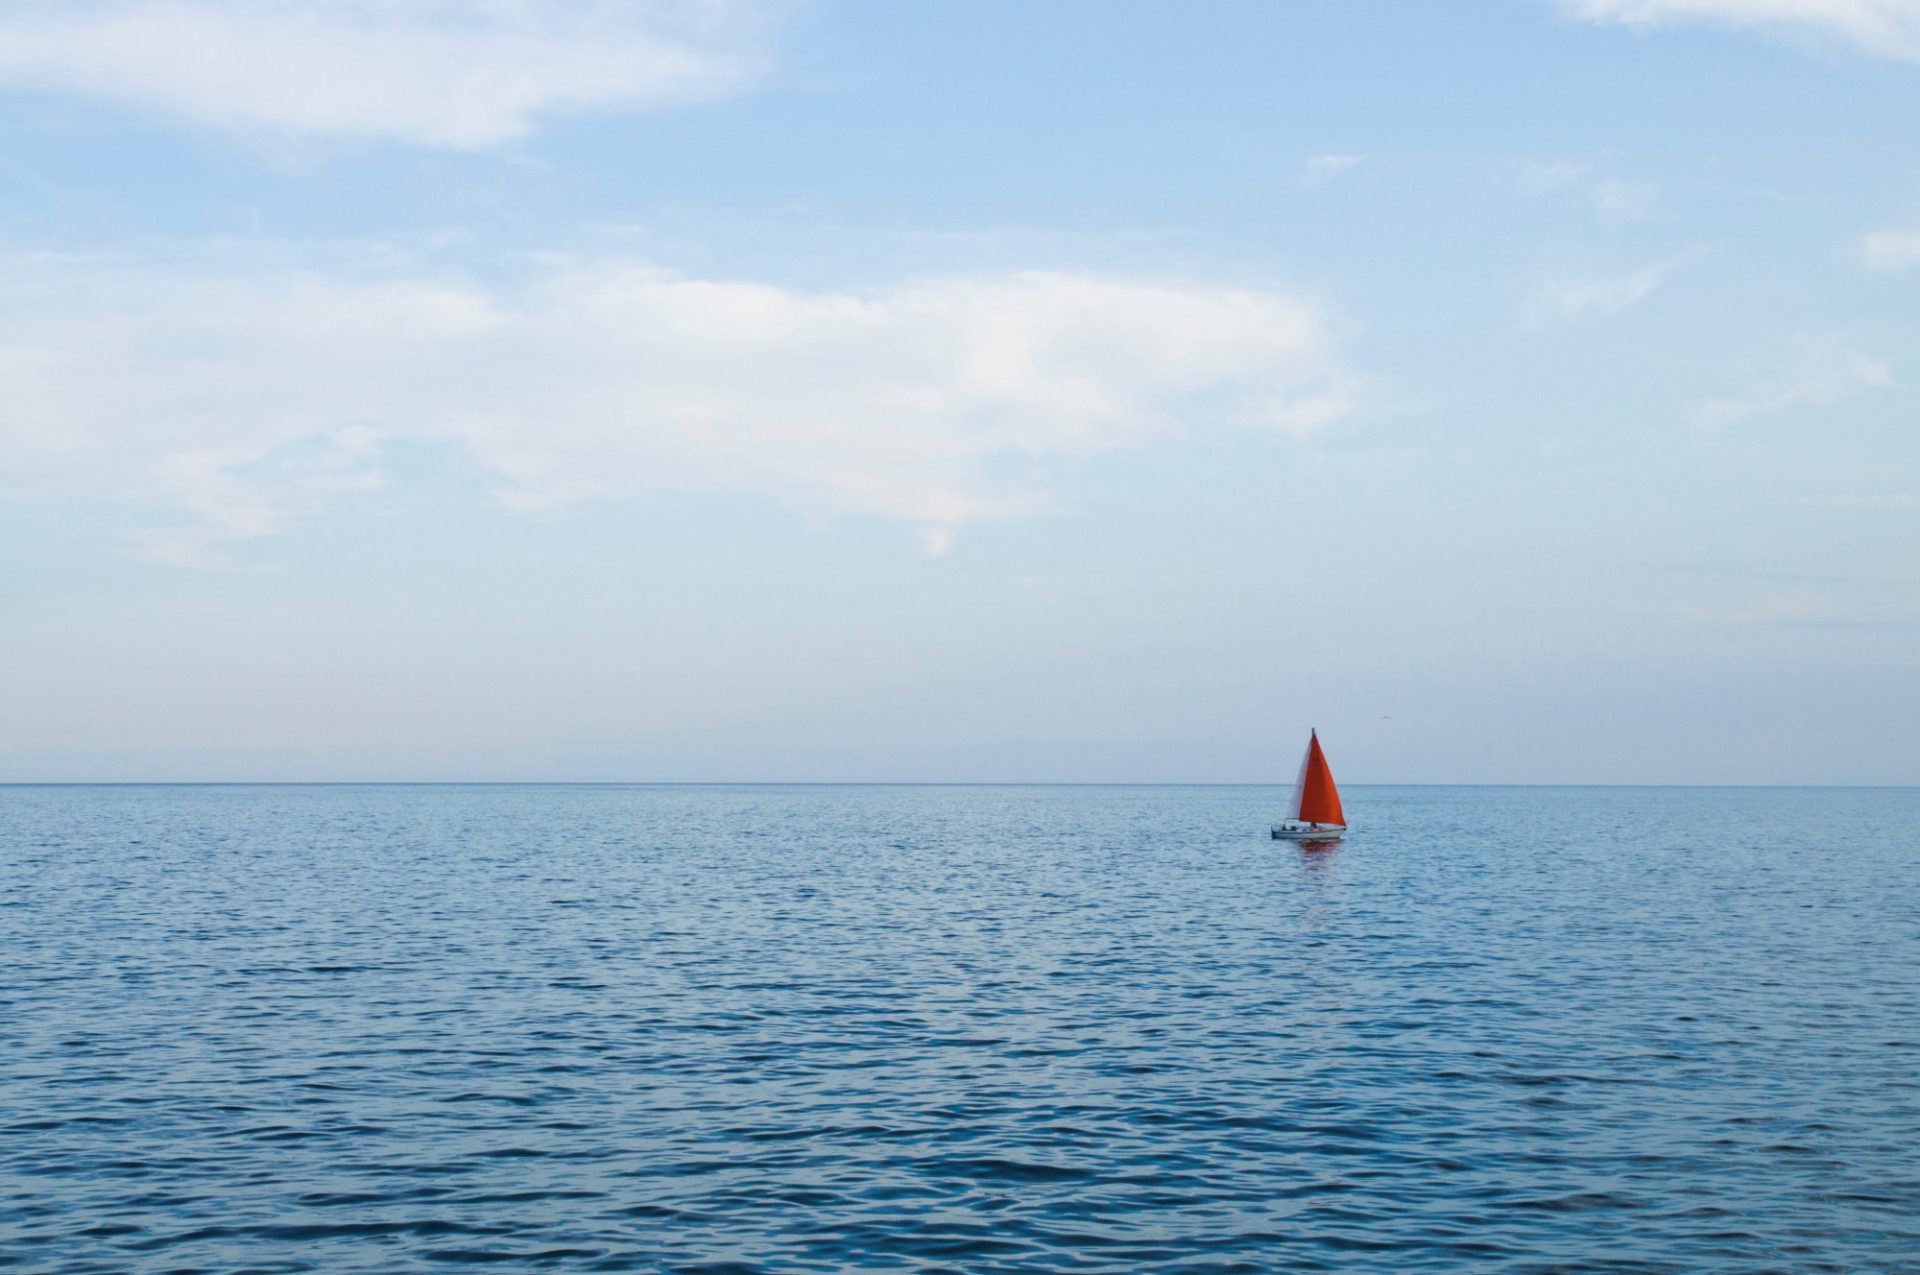 A lone red boat swimming in a vast blue ocean